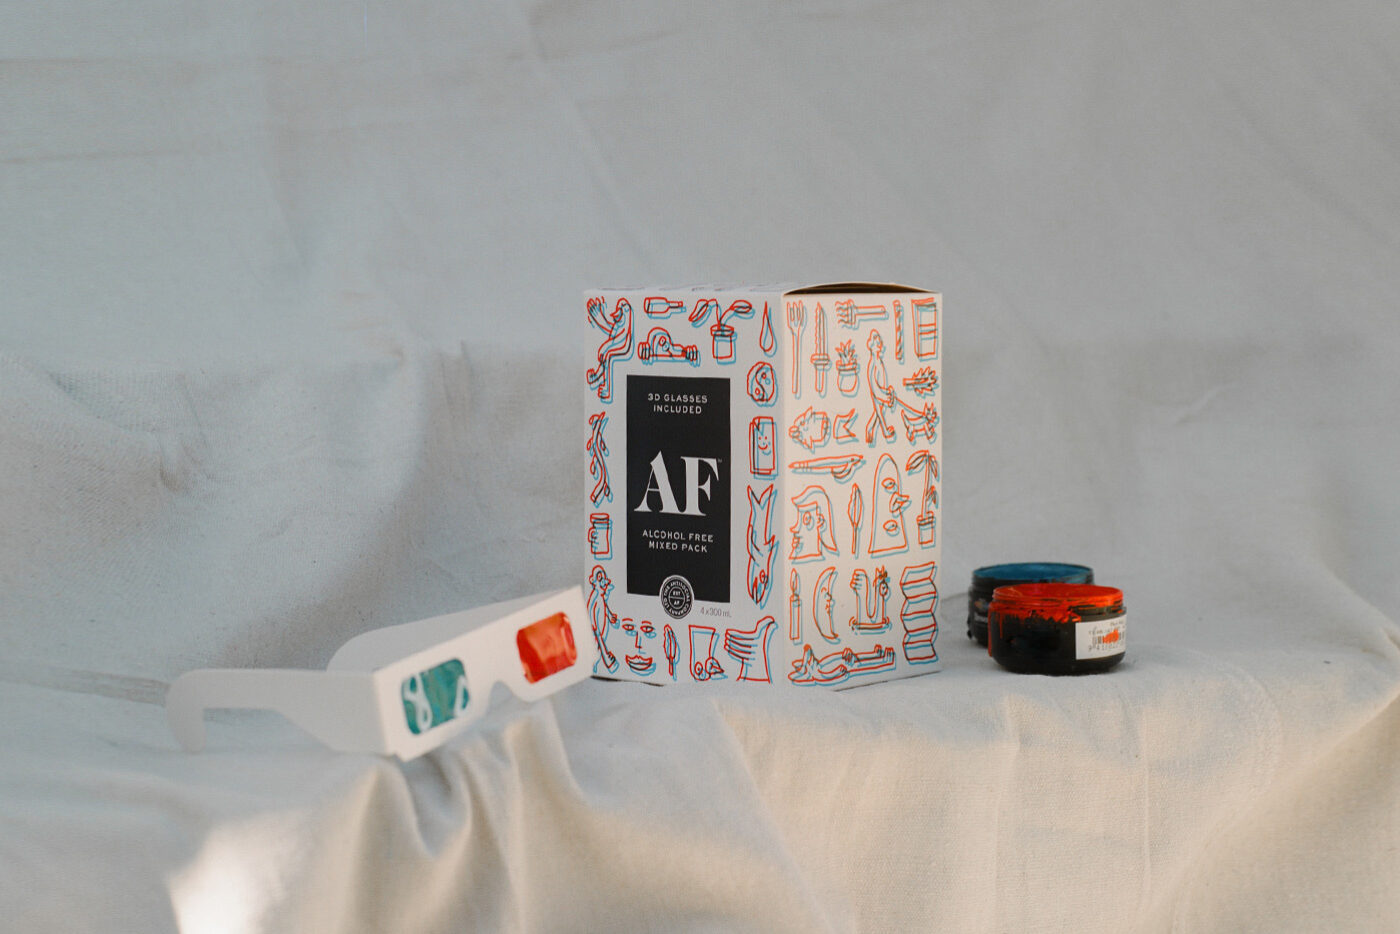 'Double-Vision' 3D hieroglyphic limited edition for AF-drinks.com - "life's better when it's not blurry"